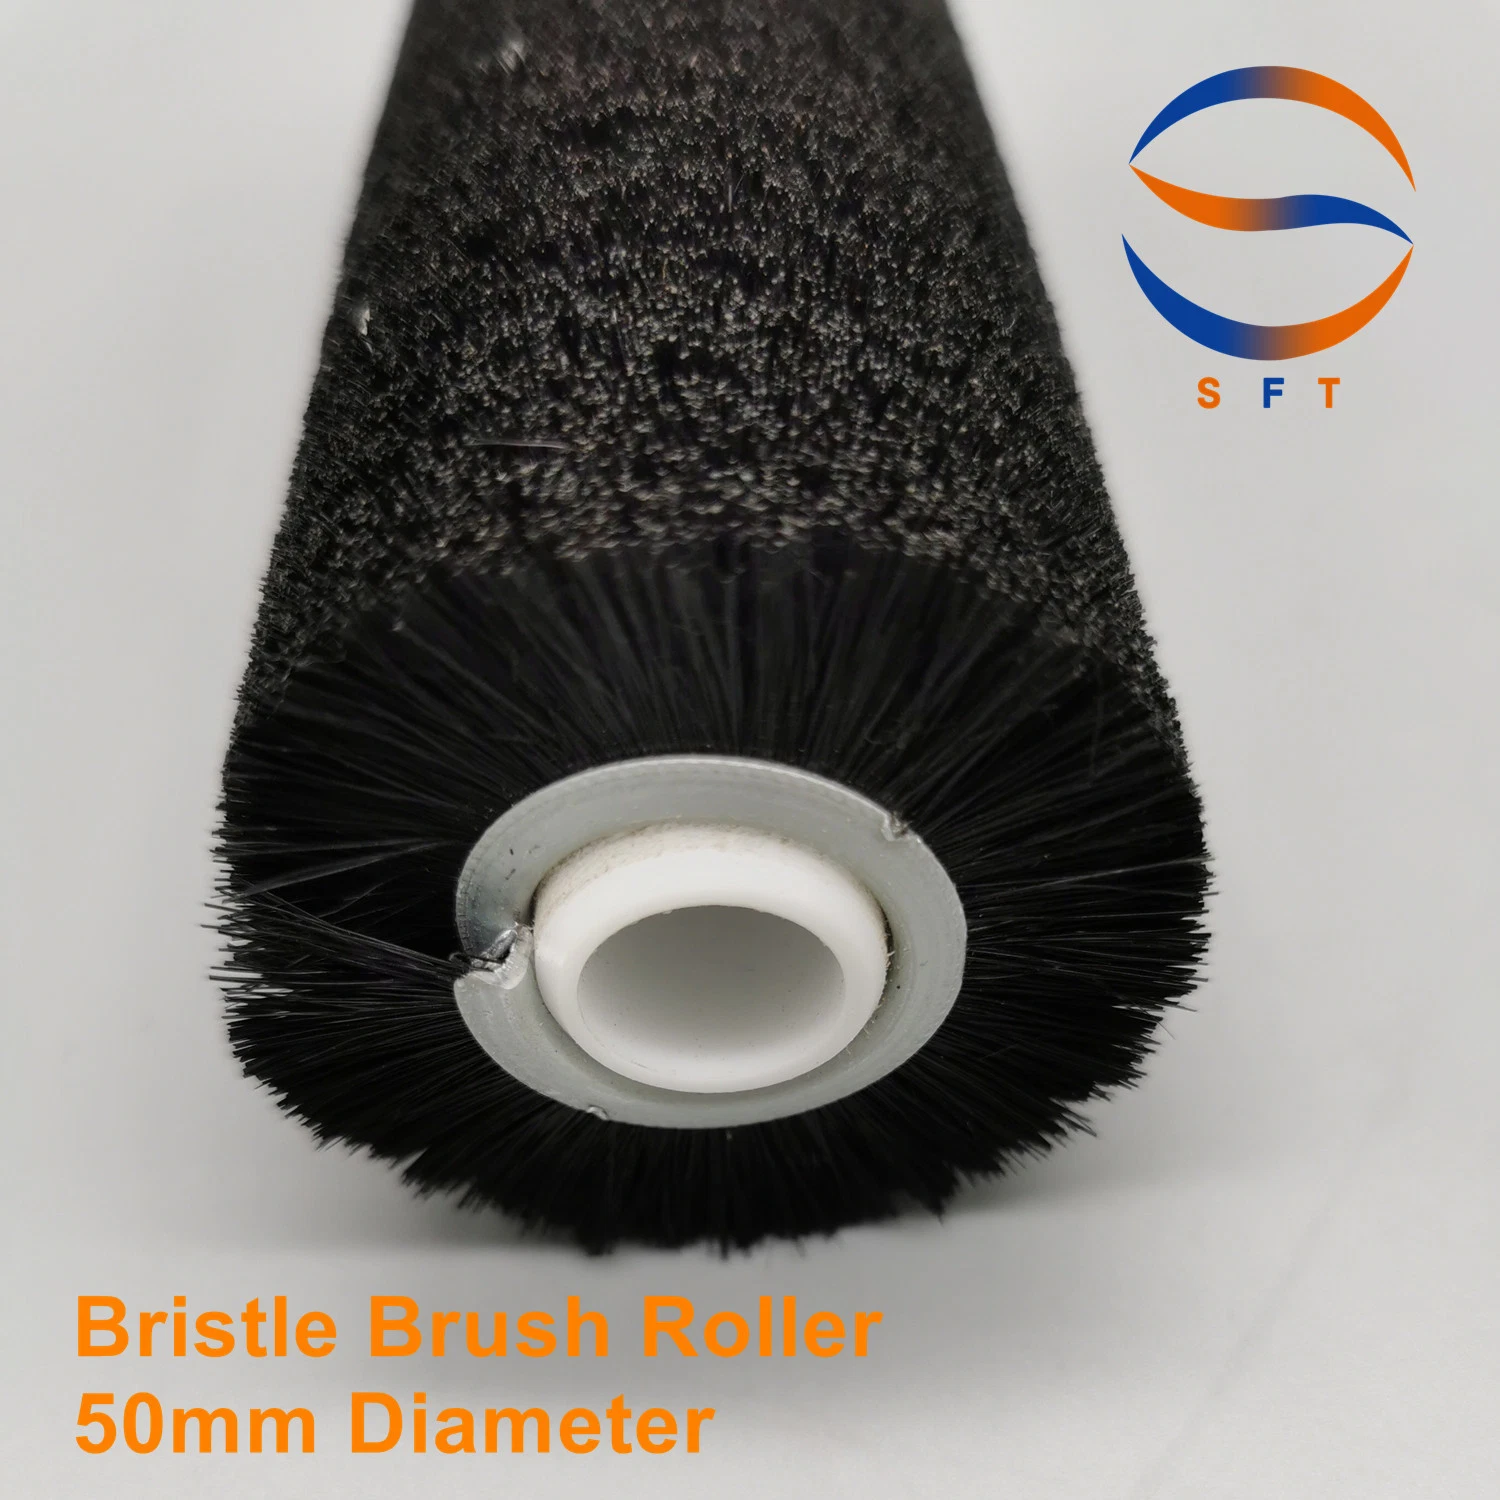 Customized Big Bristle Brush Roller Refills Hand Tools for FRP